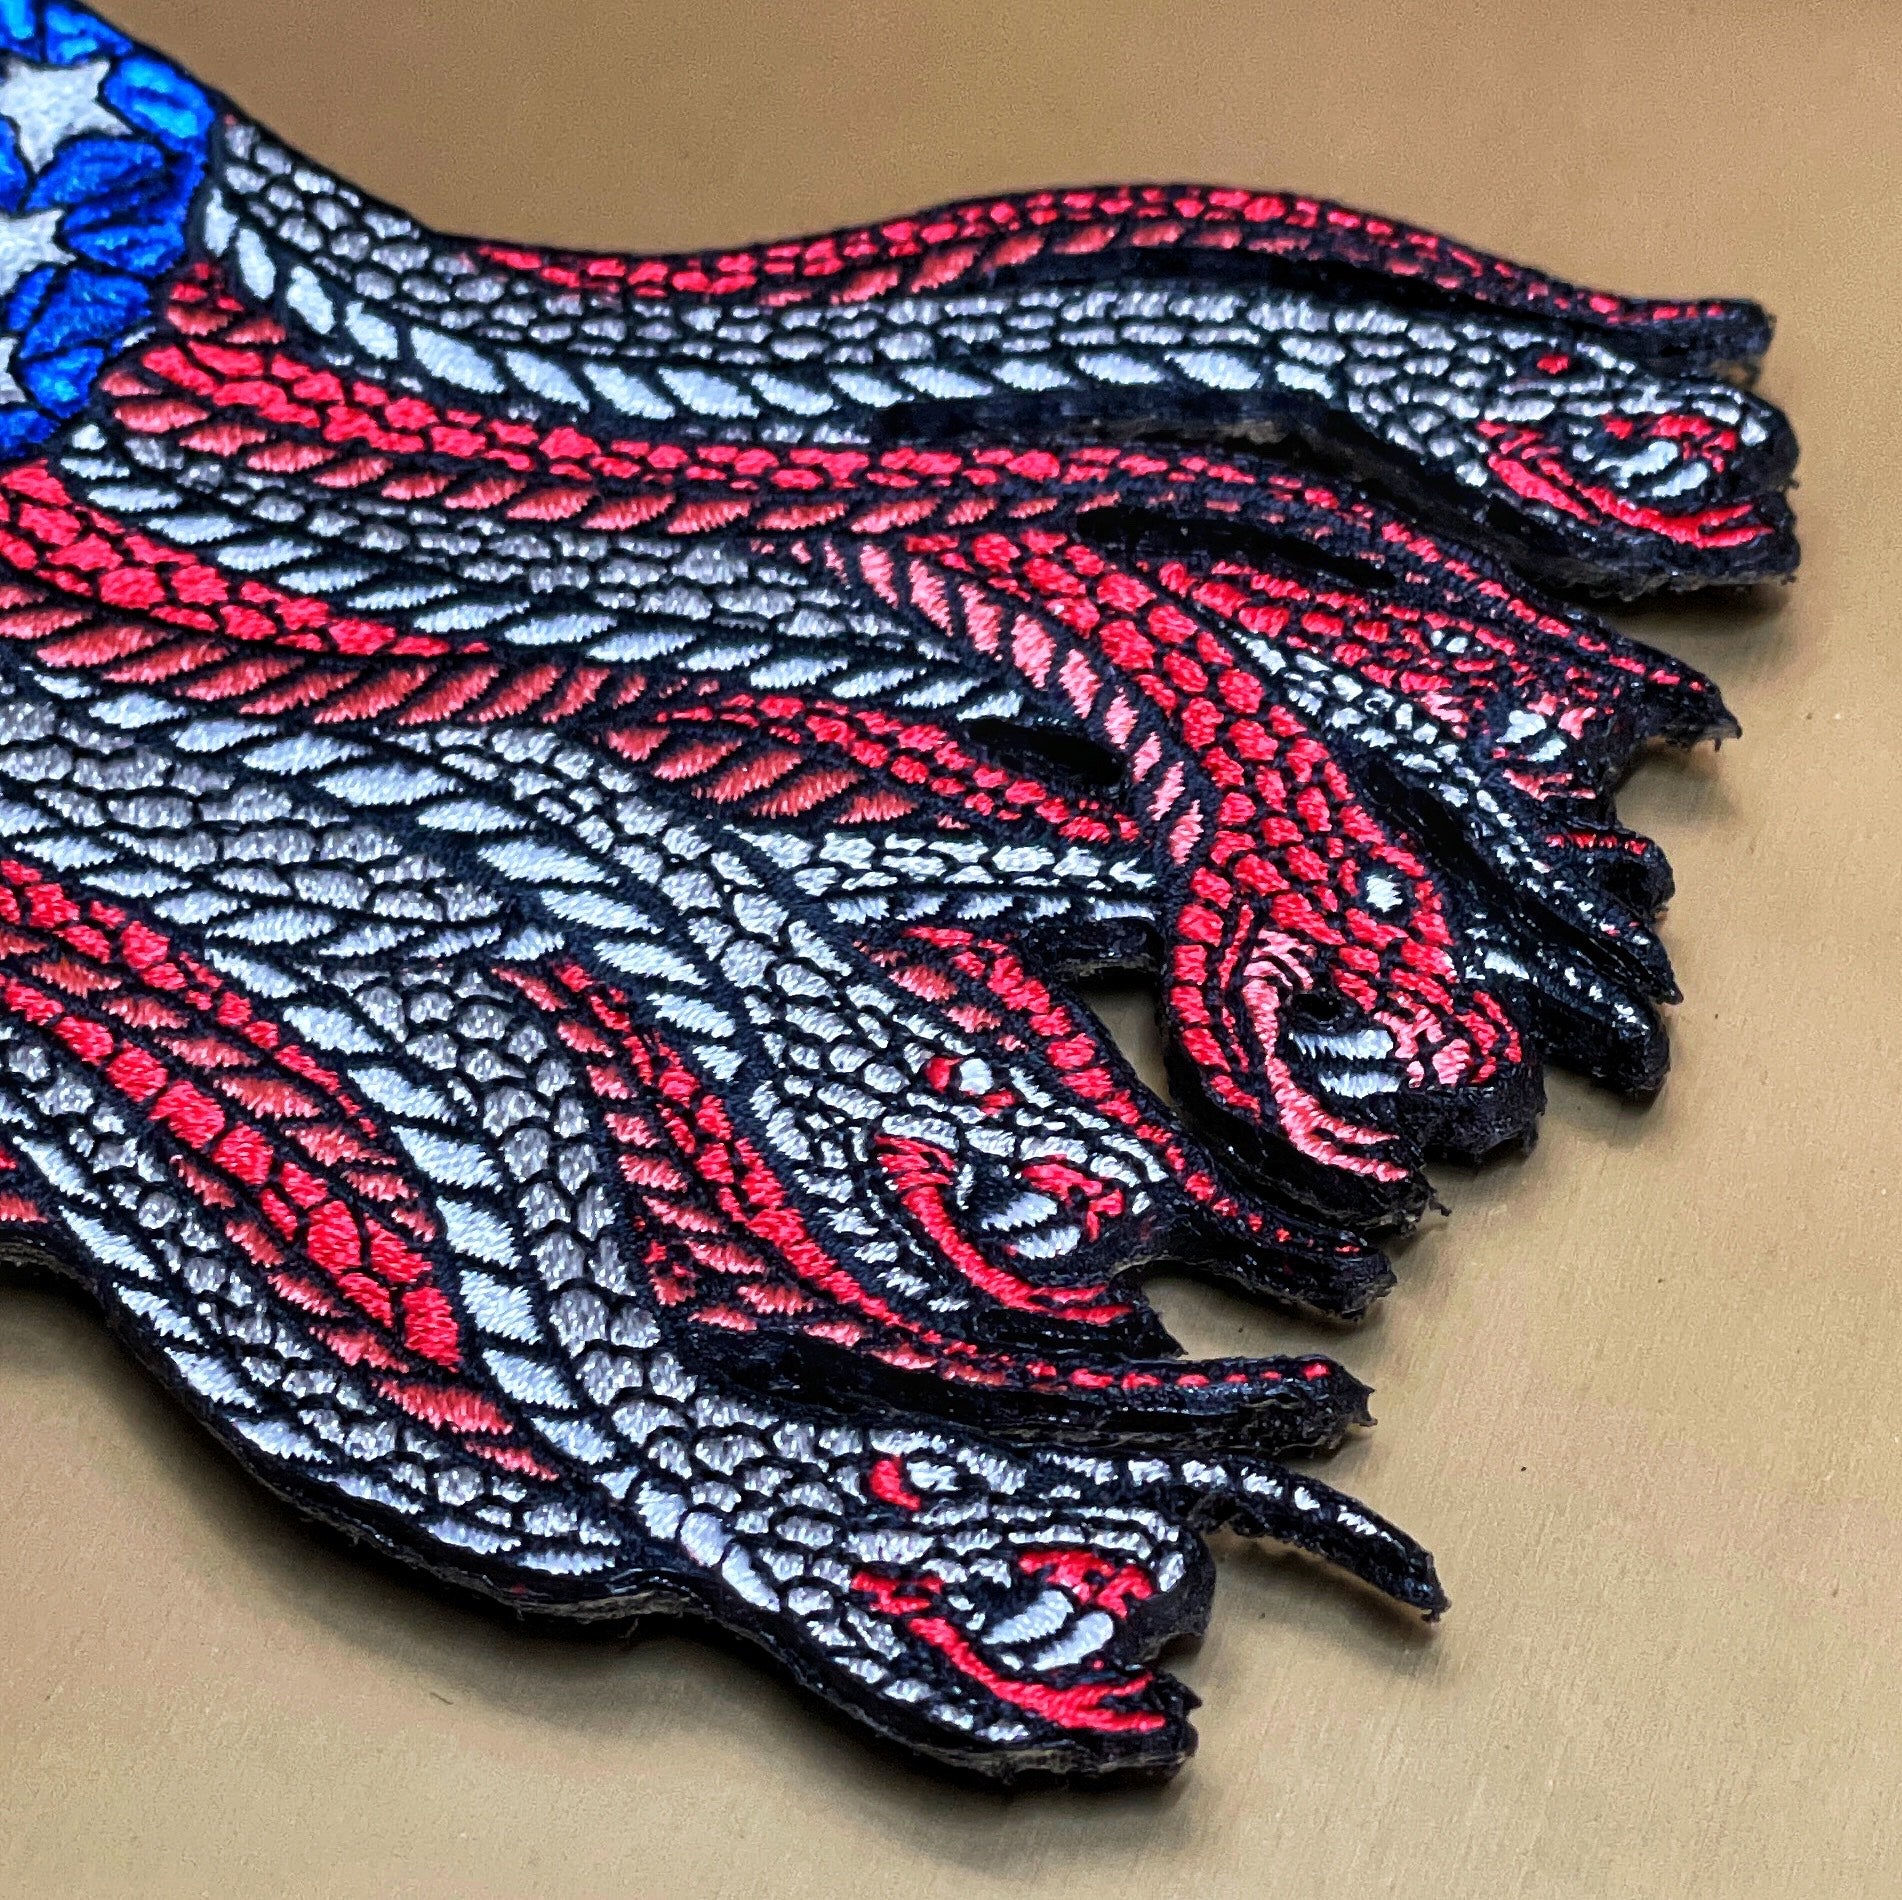 United Snakes of America Patch